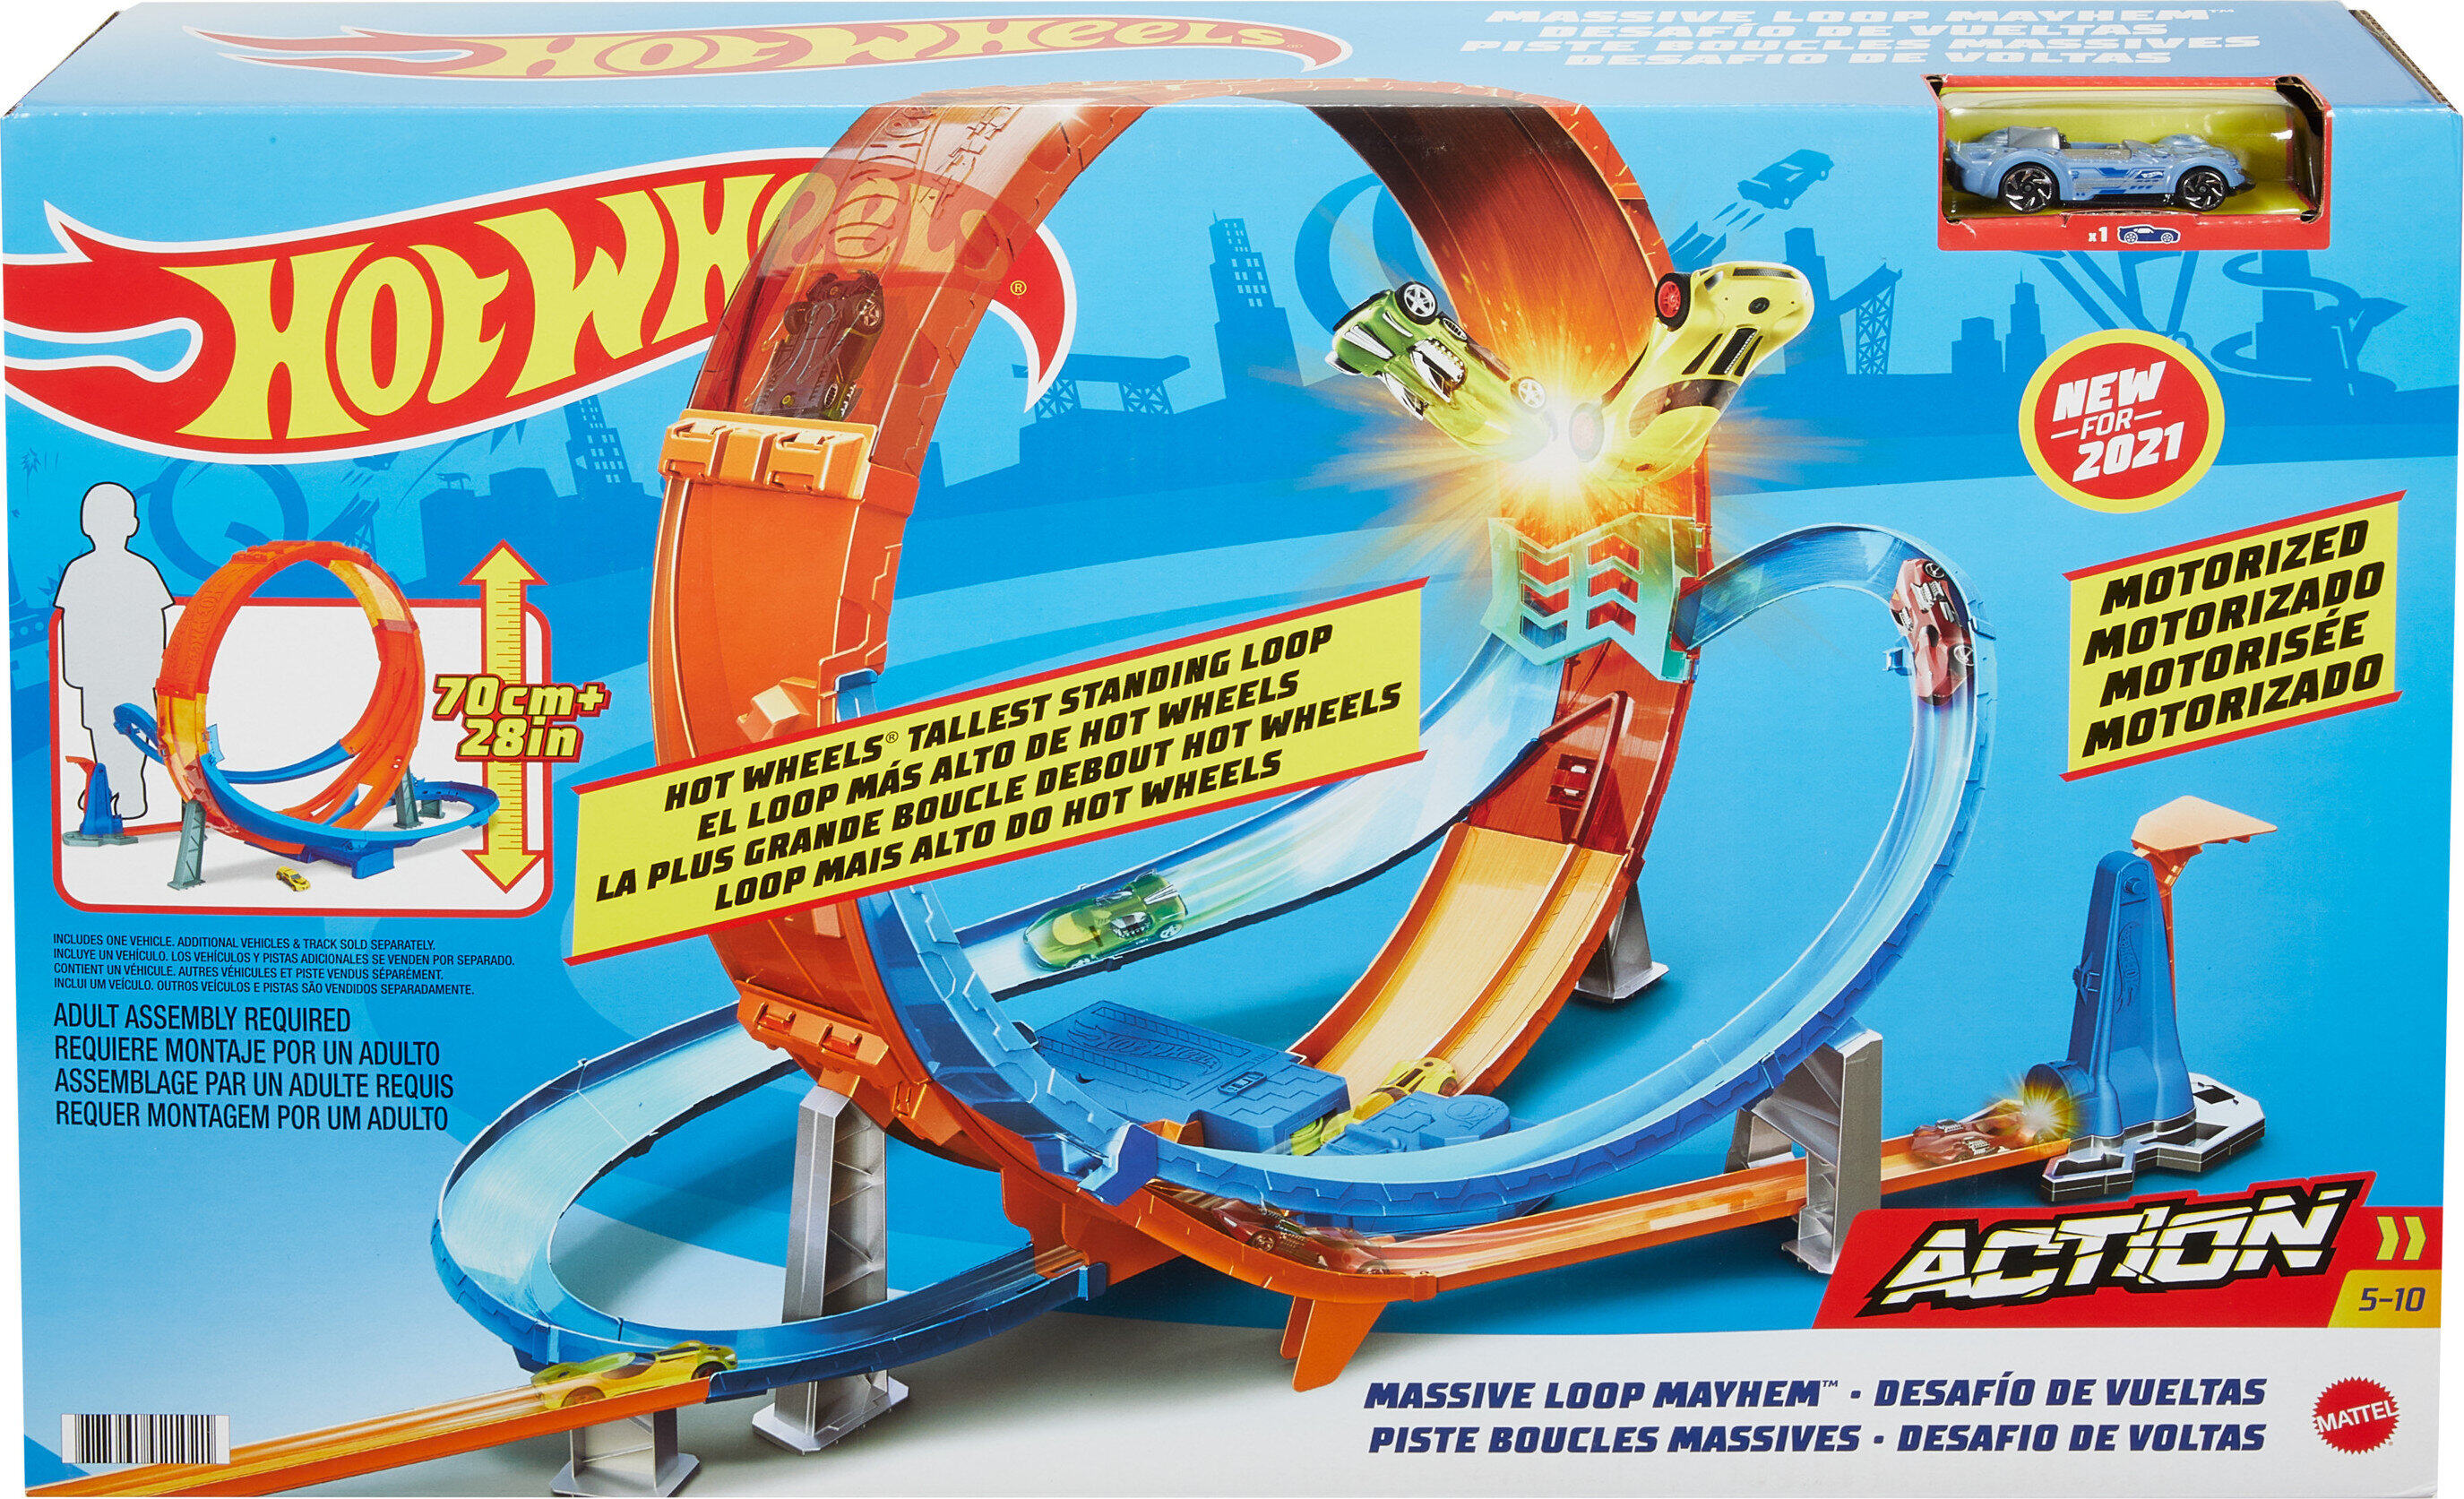 Hot Wheels Massive Loop Mayhem Track Set & 1:64 Scale Toy Car with Loop (28 Inches Wide) - image 7 of 7